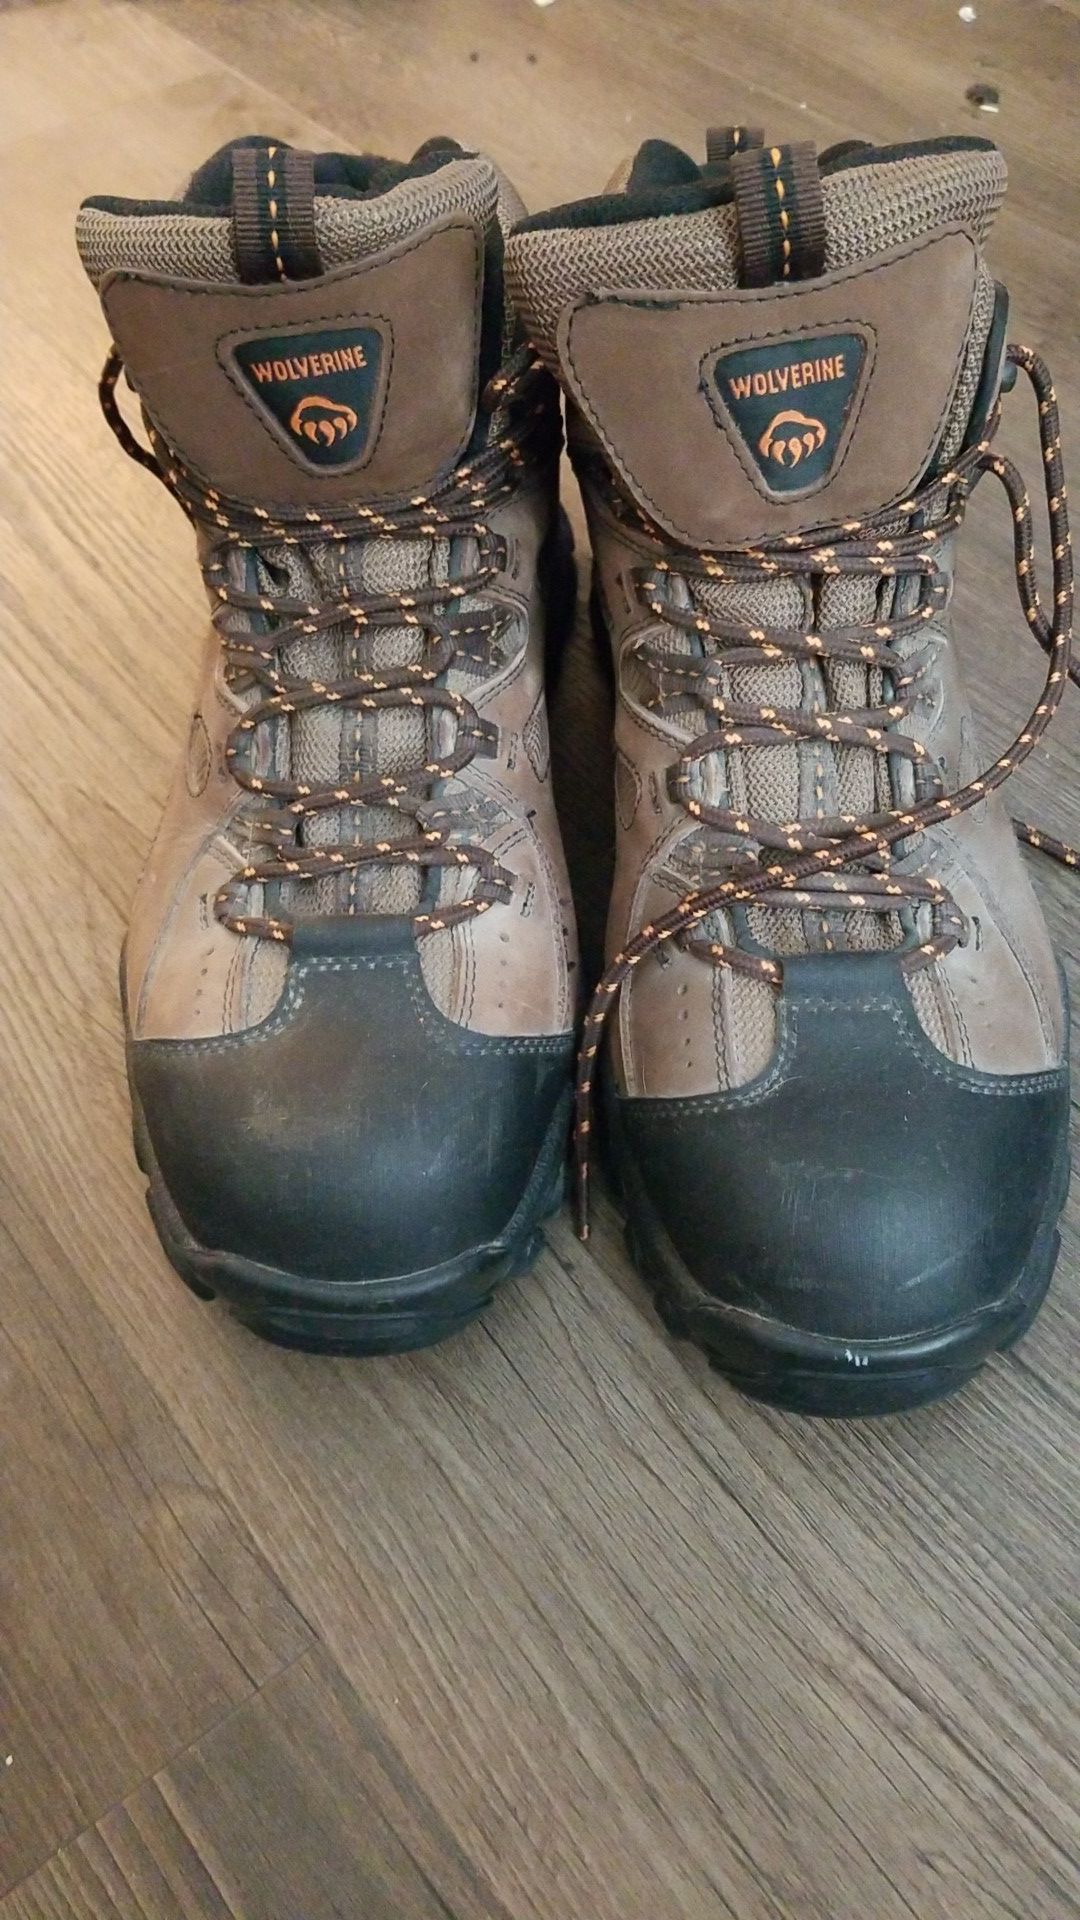 Near new wolverine boots, size 12